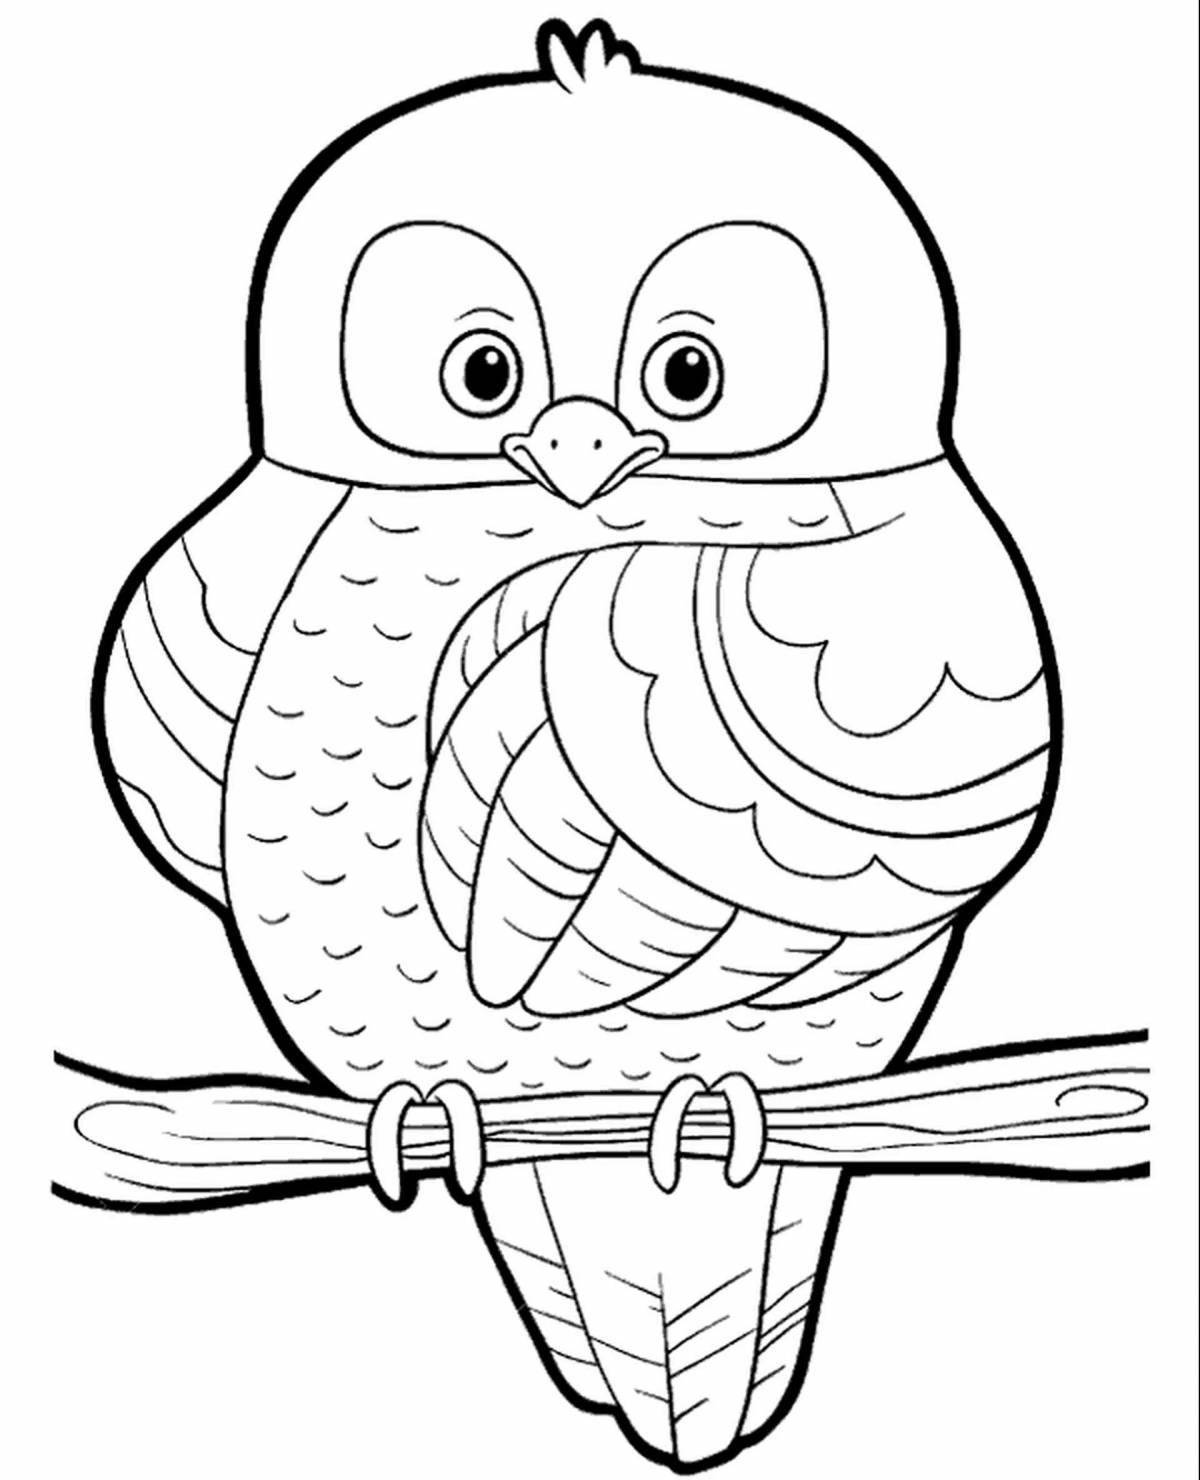 Sunny owl in the hollow for babies 2-3 years old